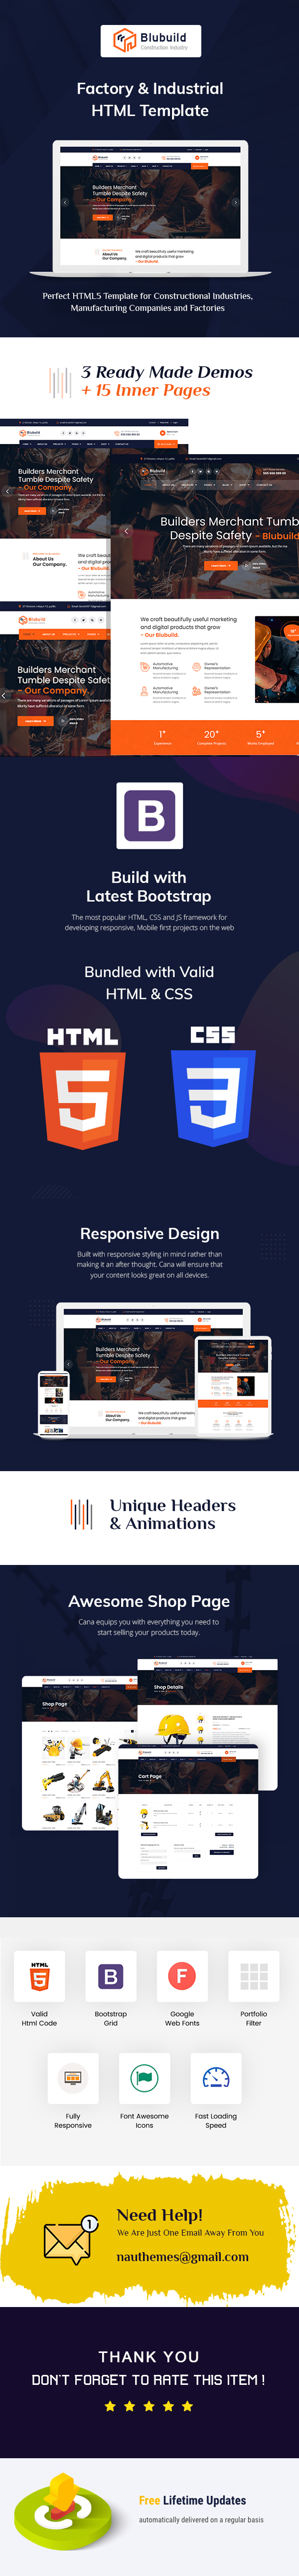 construction & Industrial HTML Template